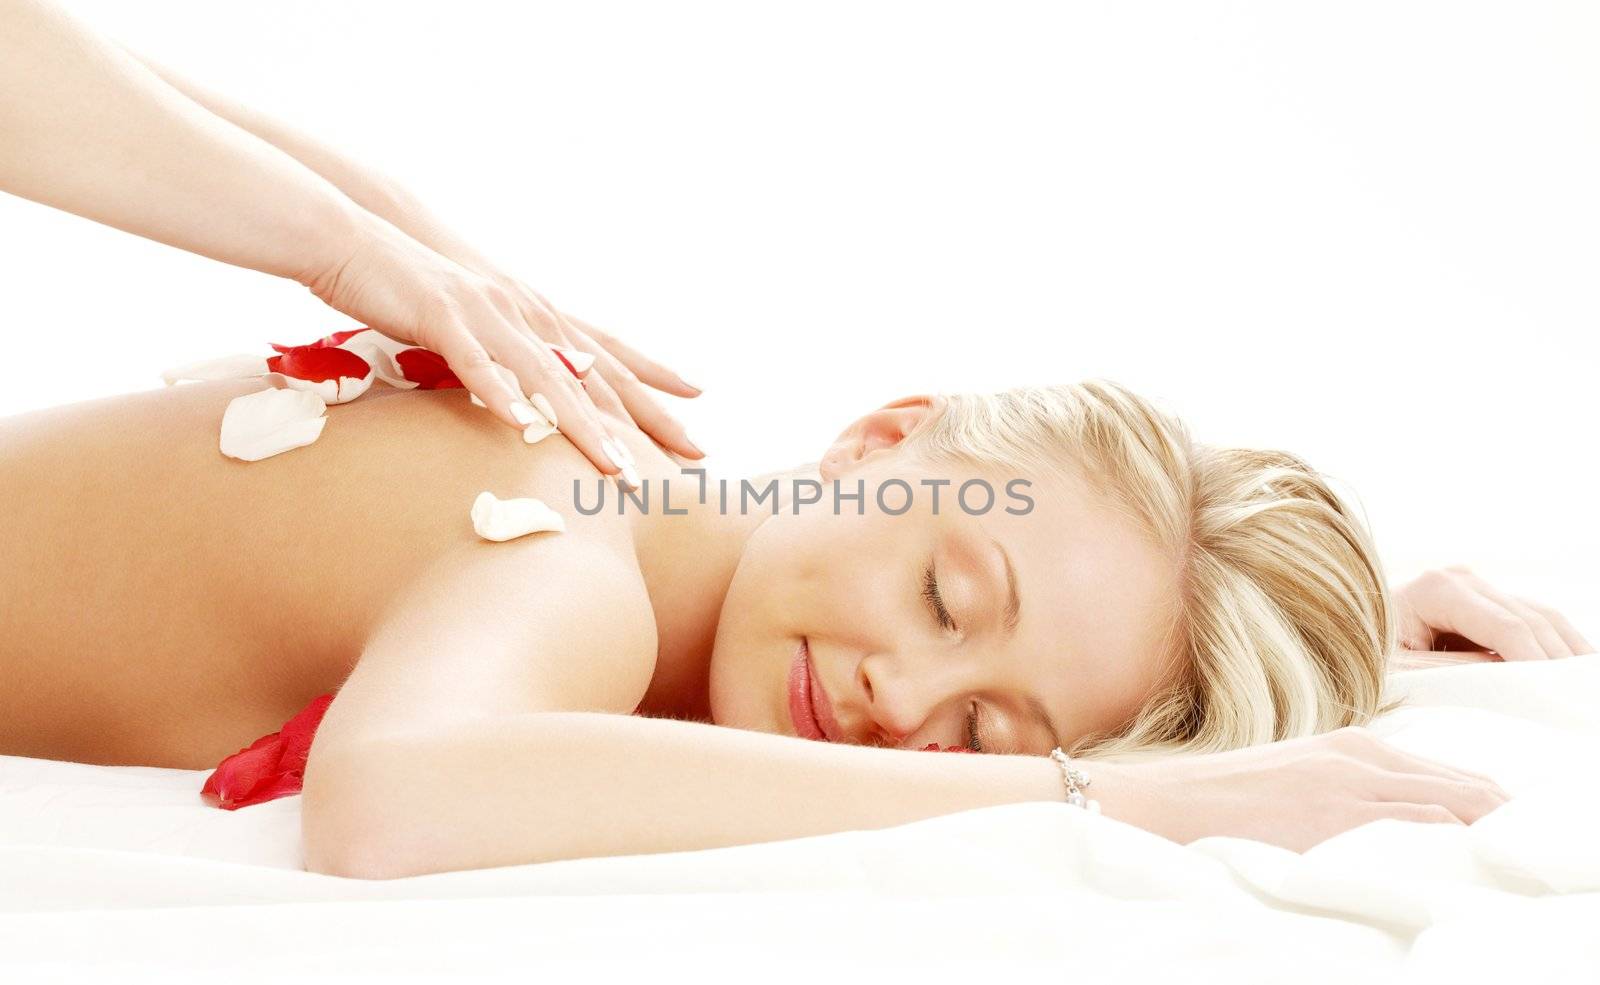 professional massage with flower petals by dolgachov